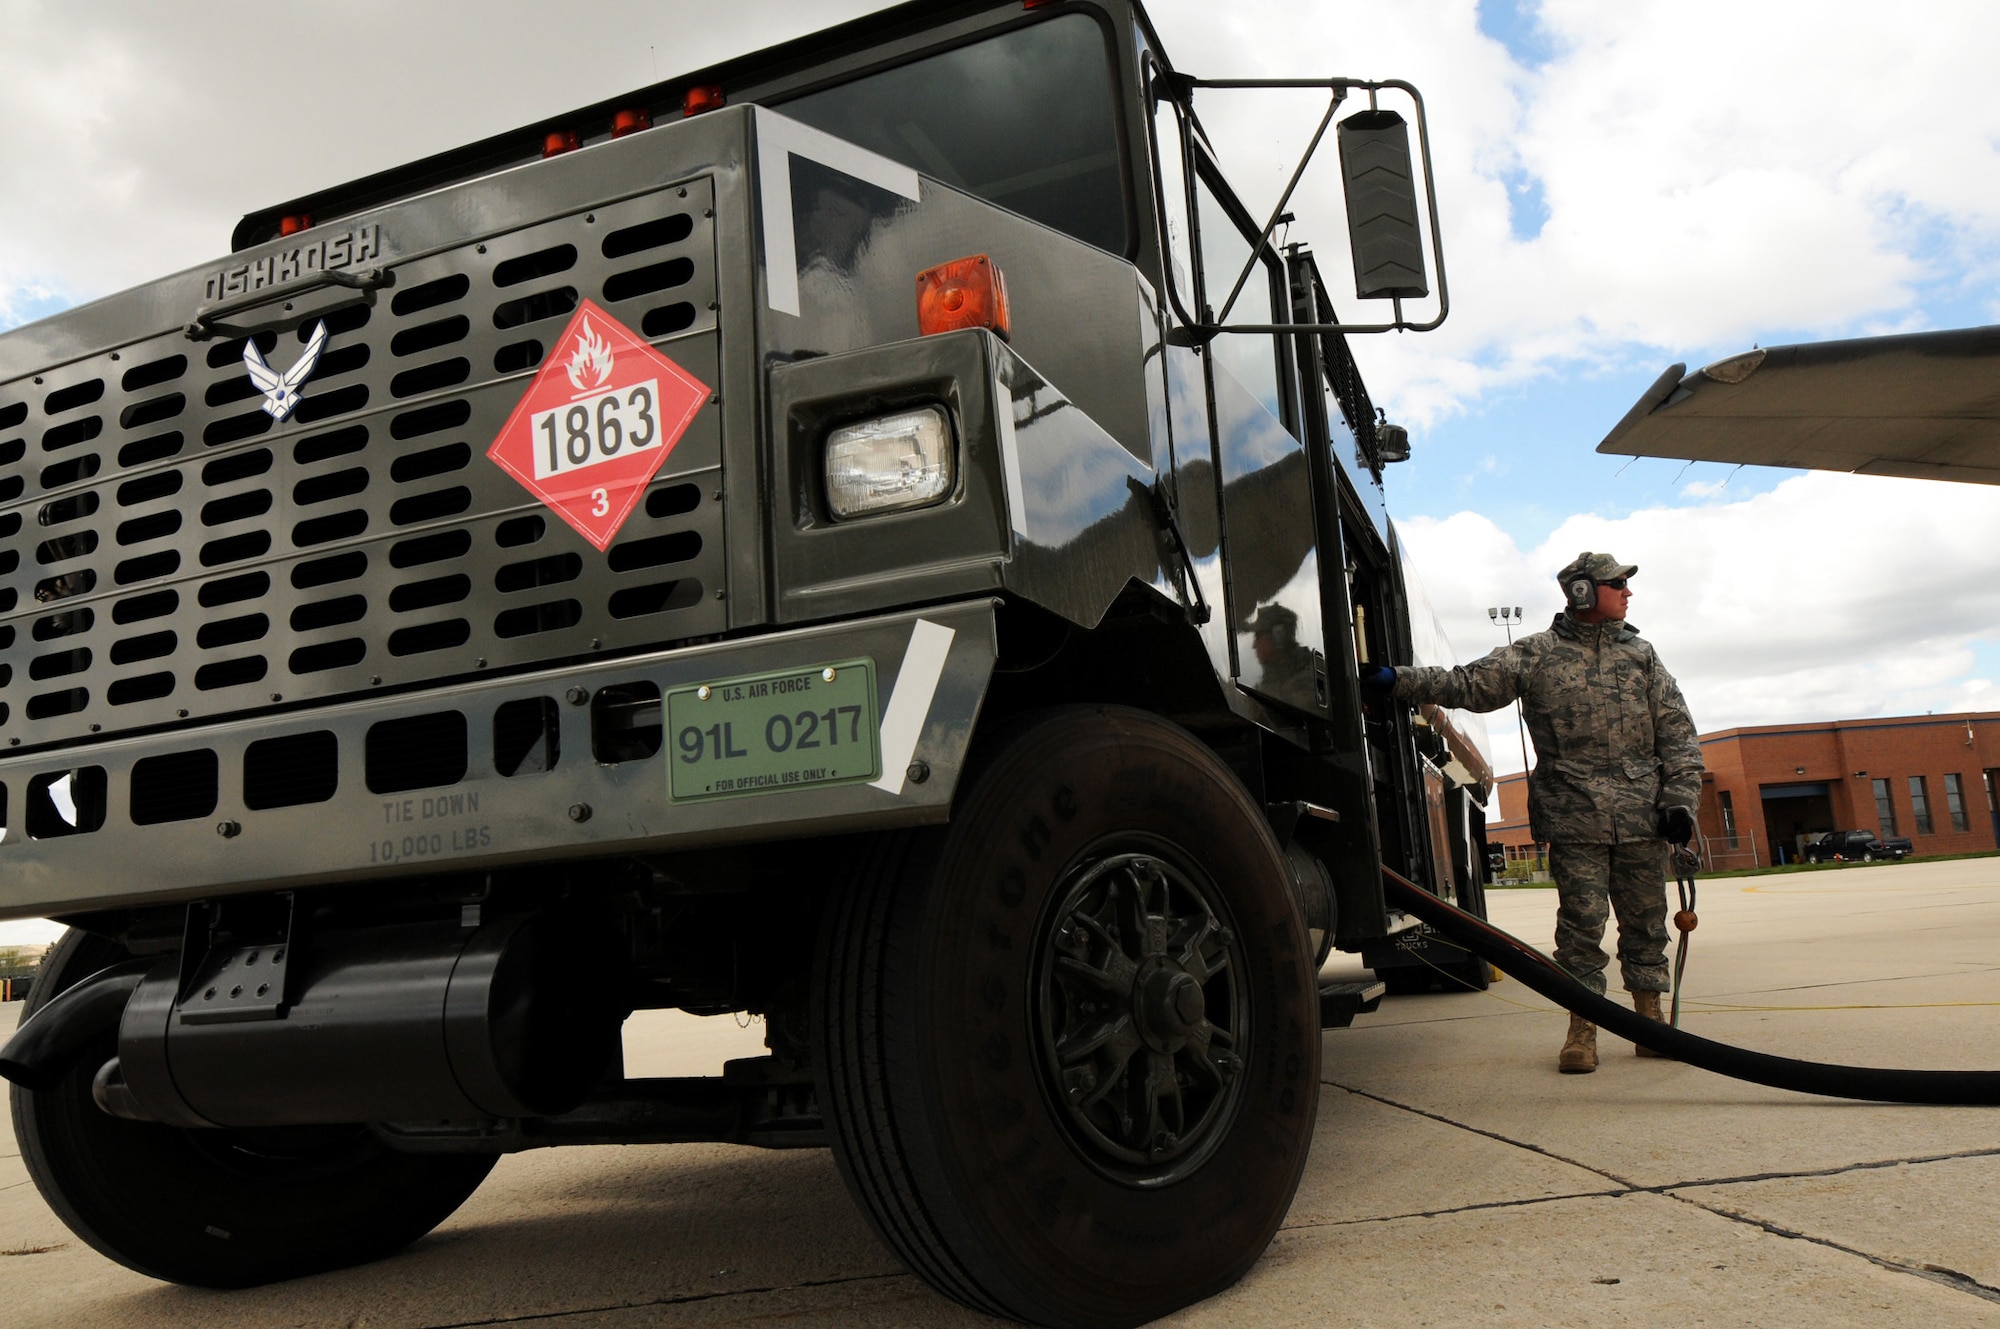 Exchange Rolling Out New Truck Wrap Ahead of 124th Army-Navy Game